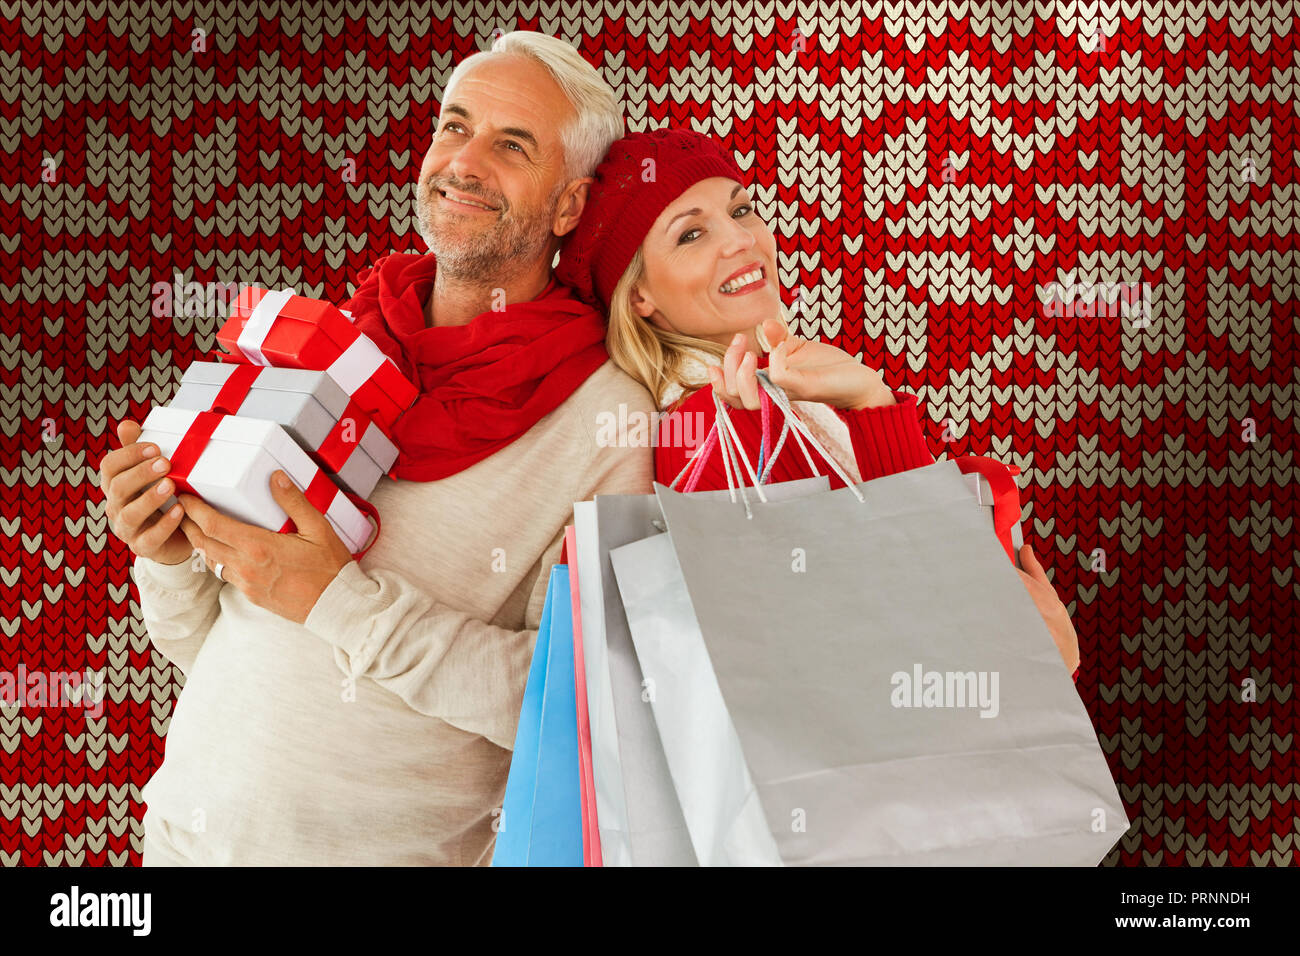 Composite image of happy festive couple with gifts and bags Stock Photo